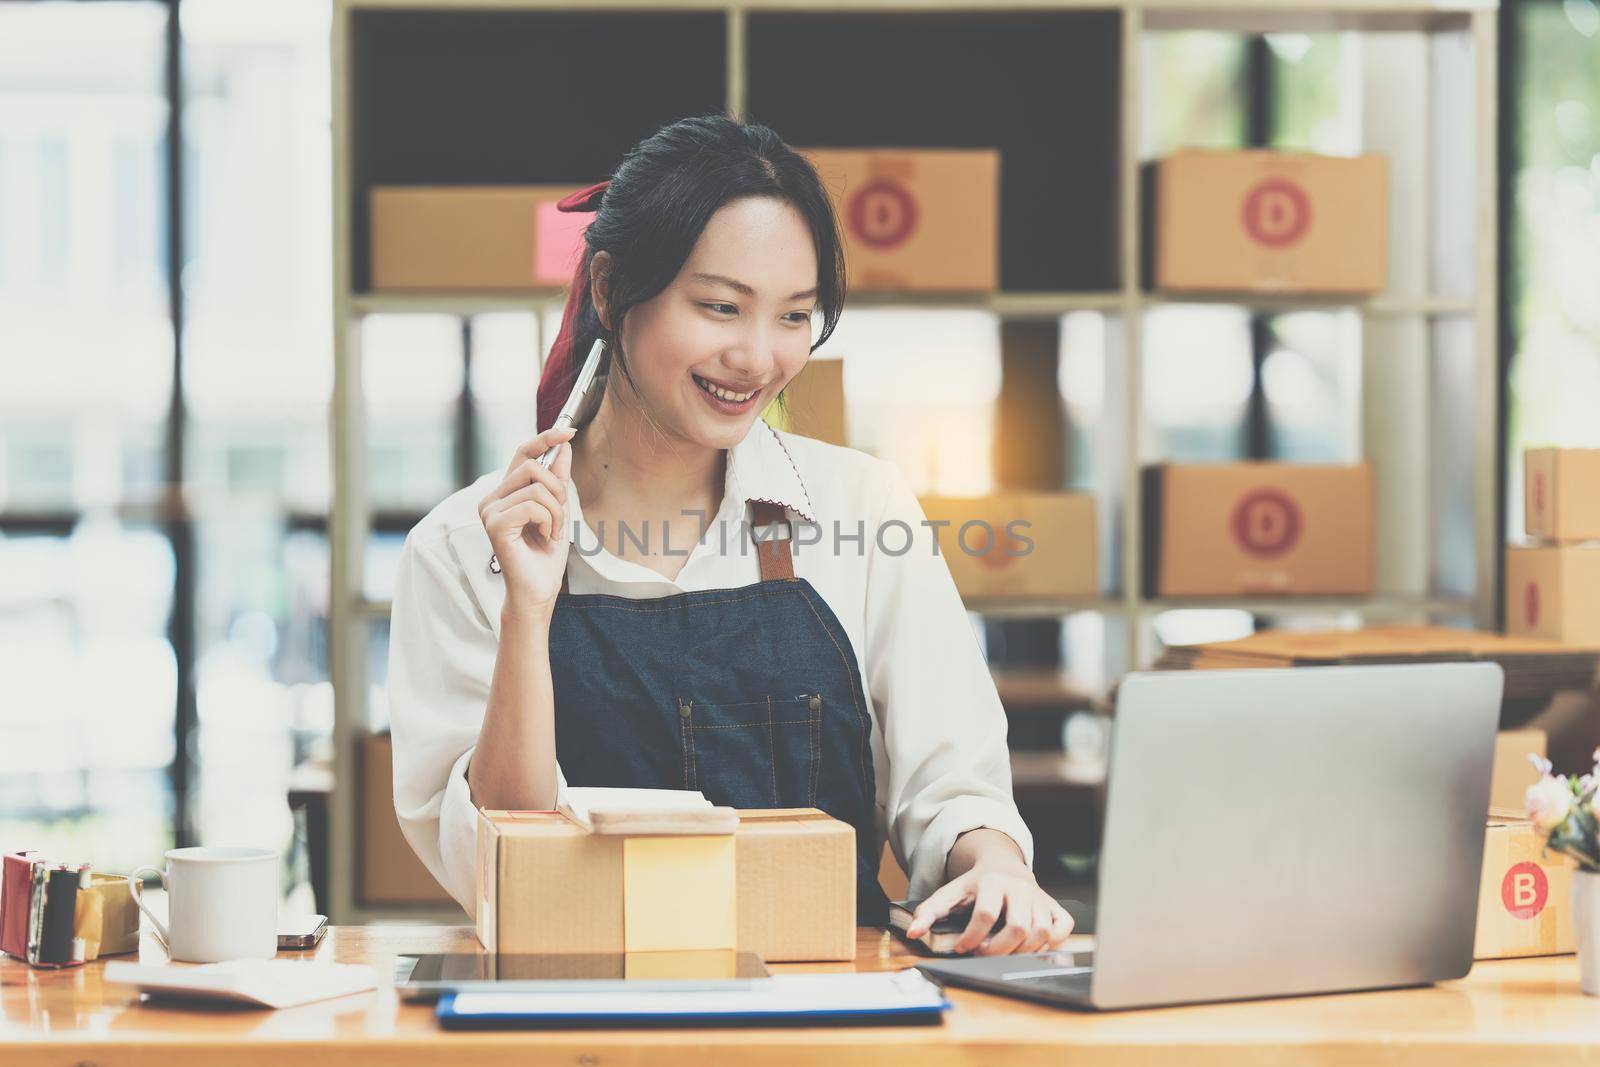 Asian small business owner working at home office. Business retail market and online sell marketing delivery, SME e-commerce concept.